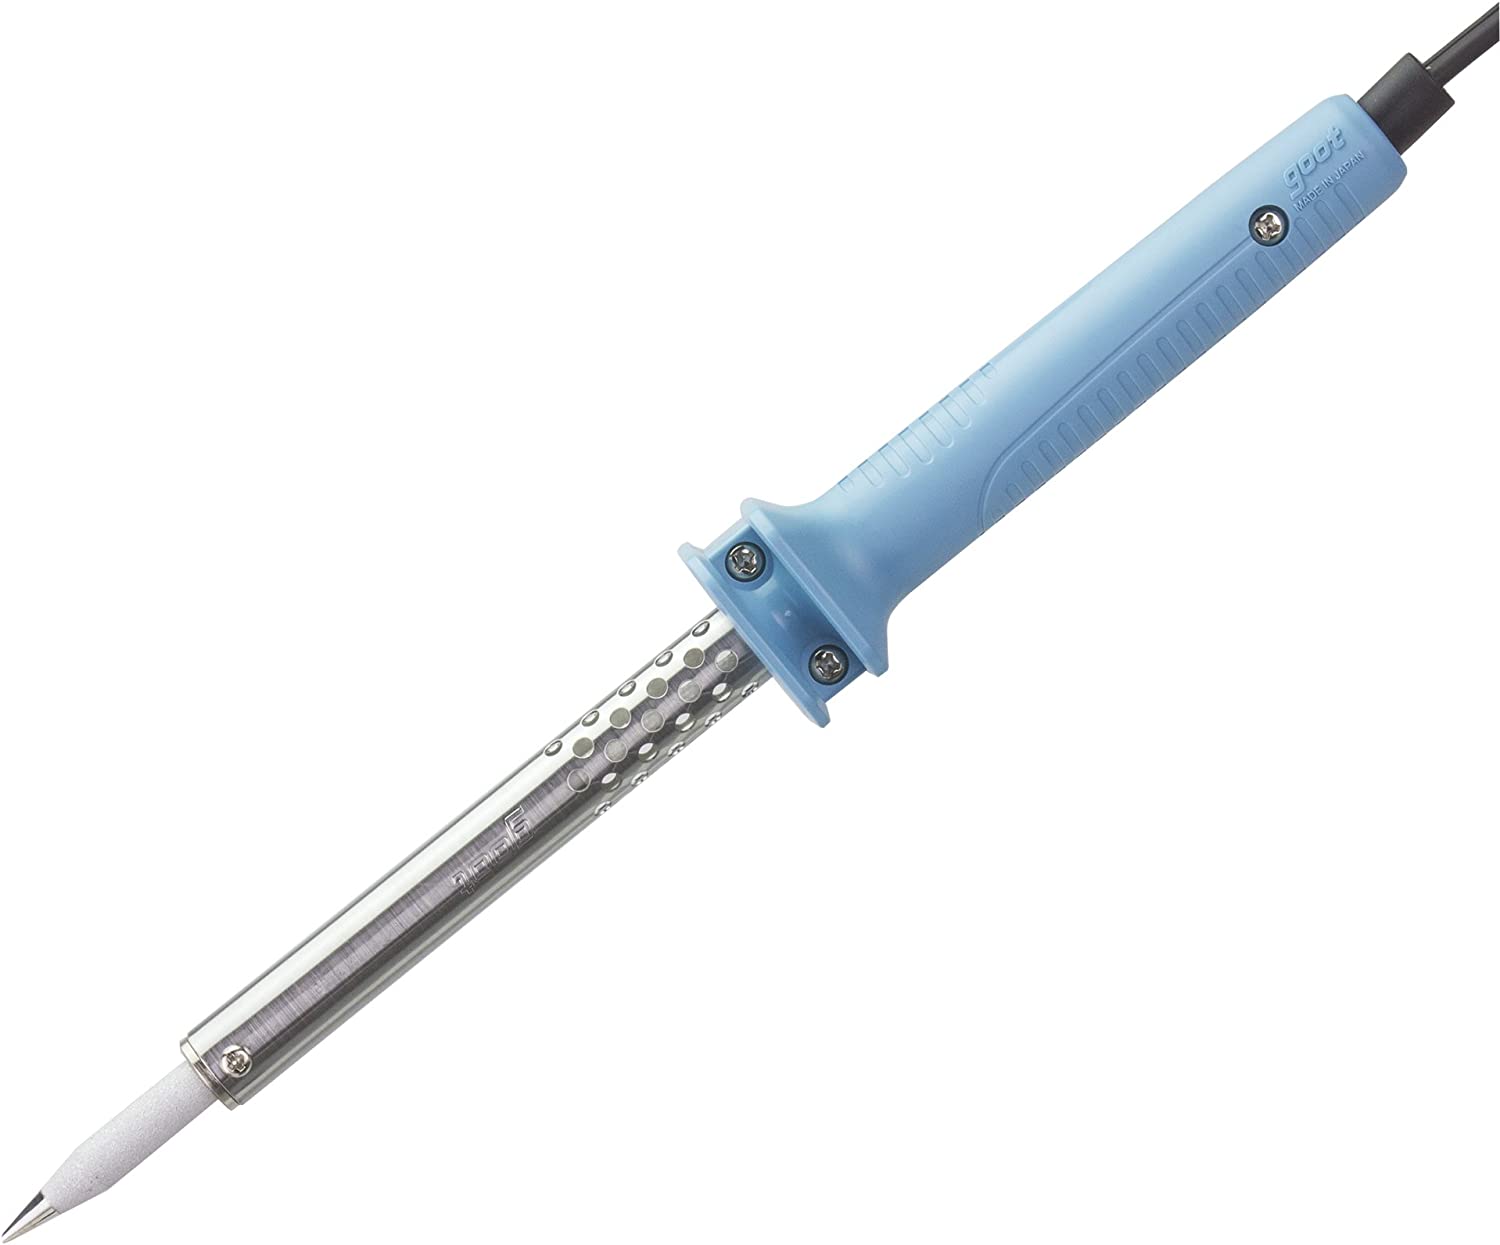 GOOT KS-80R Soldering Iron for General Electric, Nichrome Heater